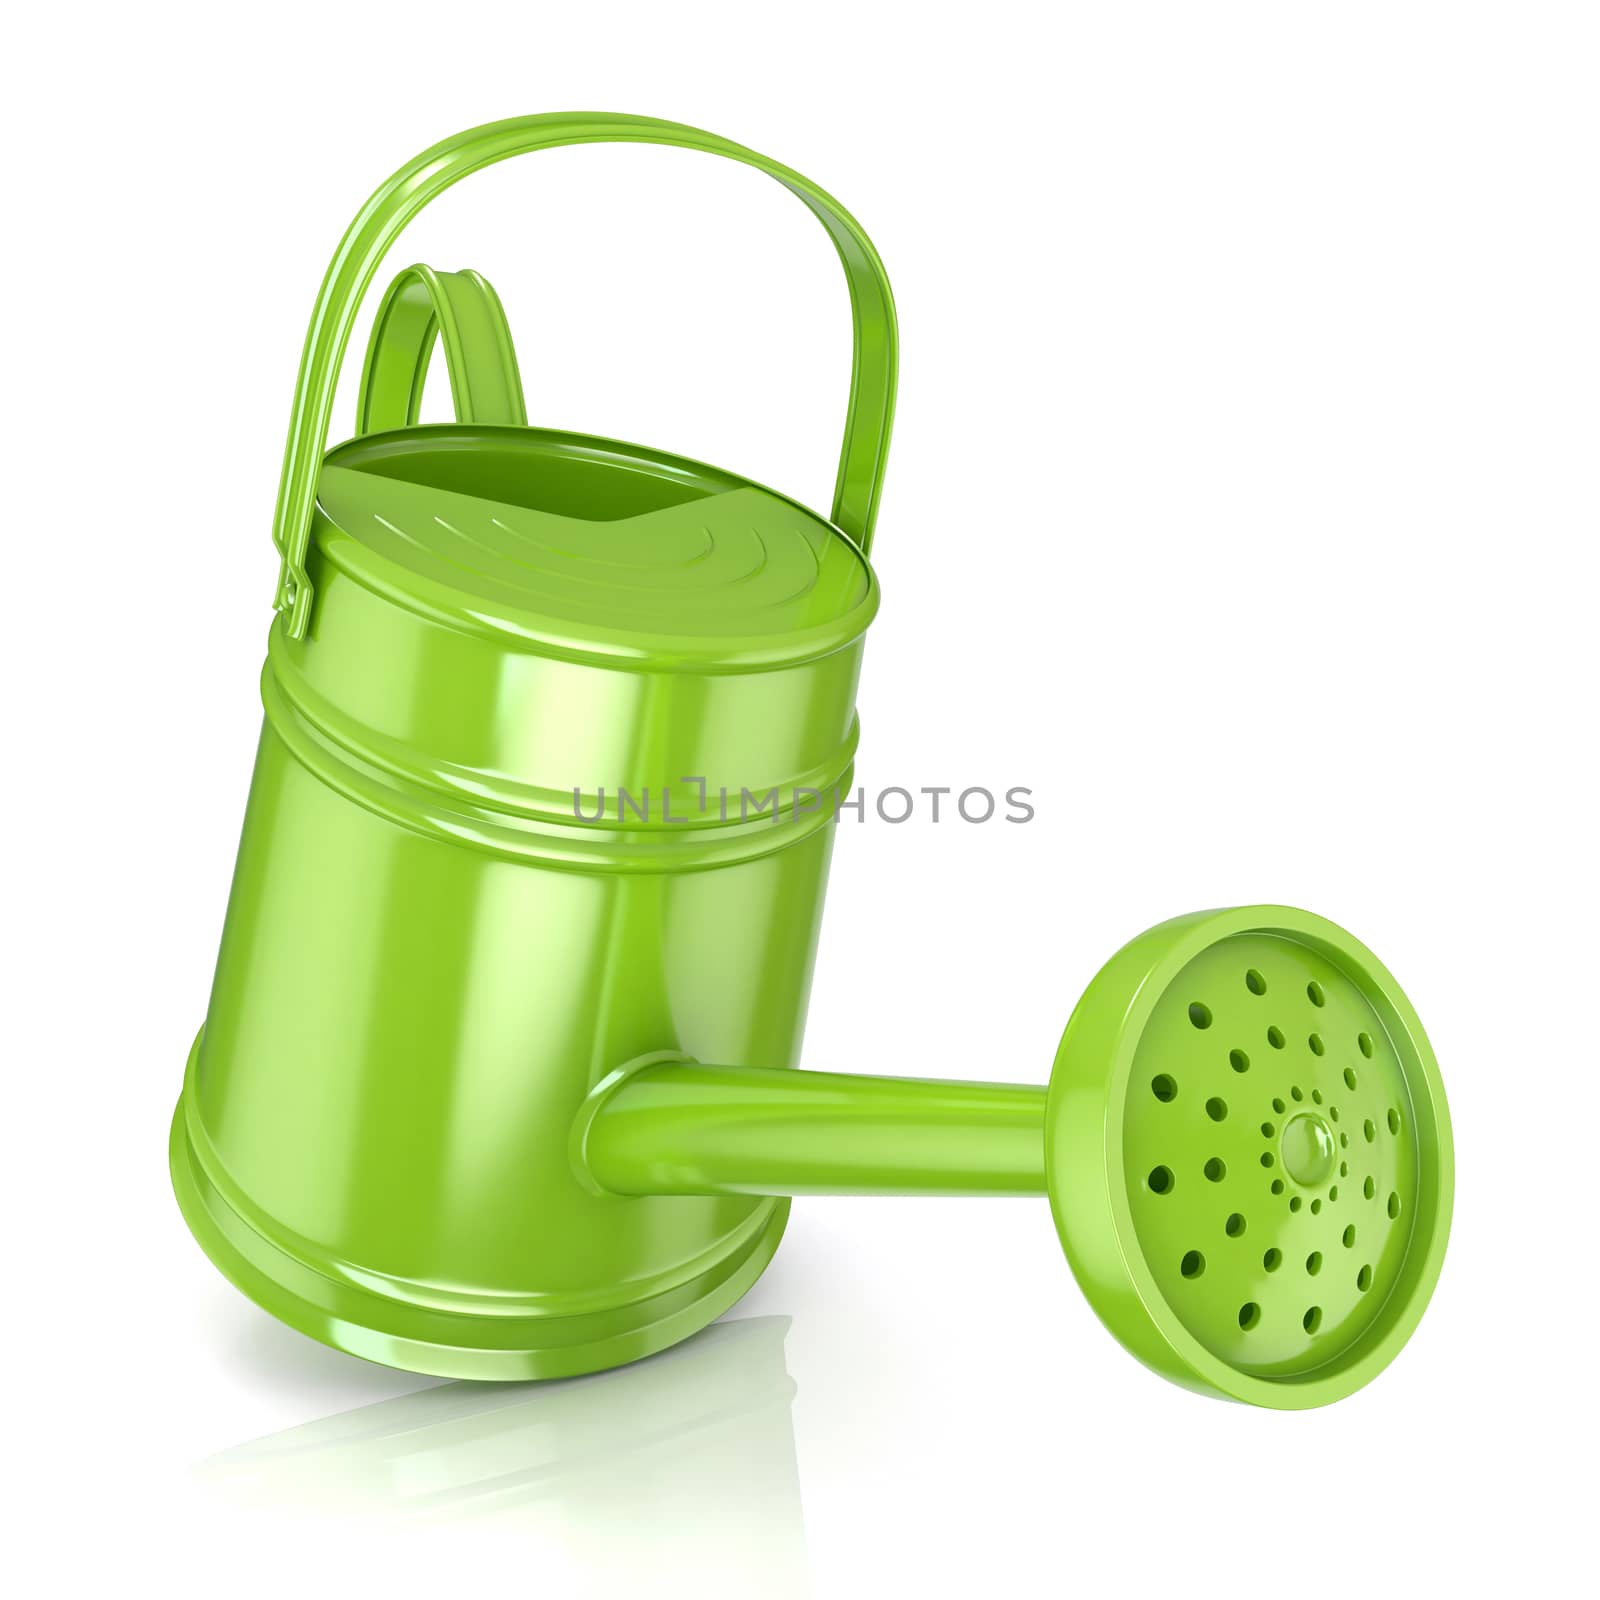 Green watering can 3D by djmilic